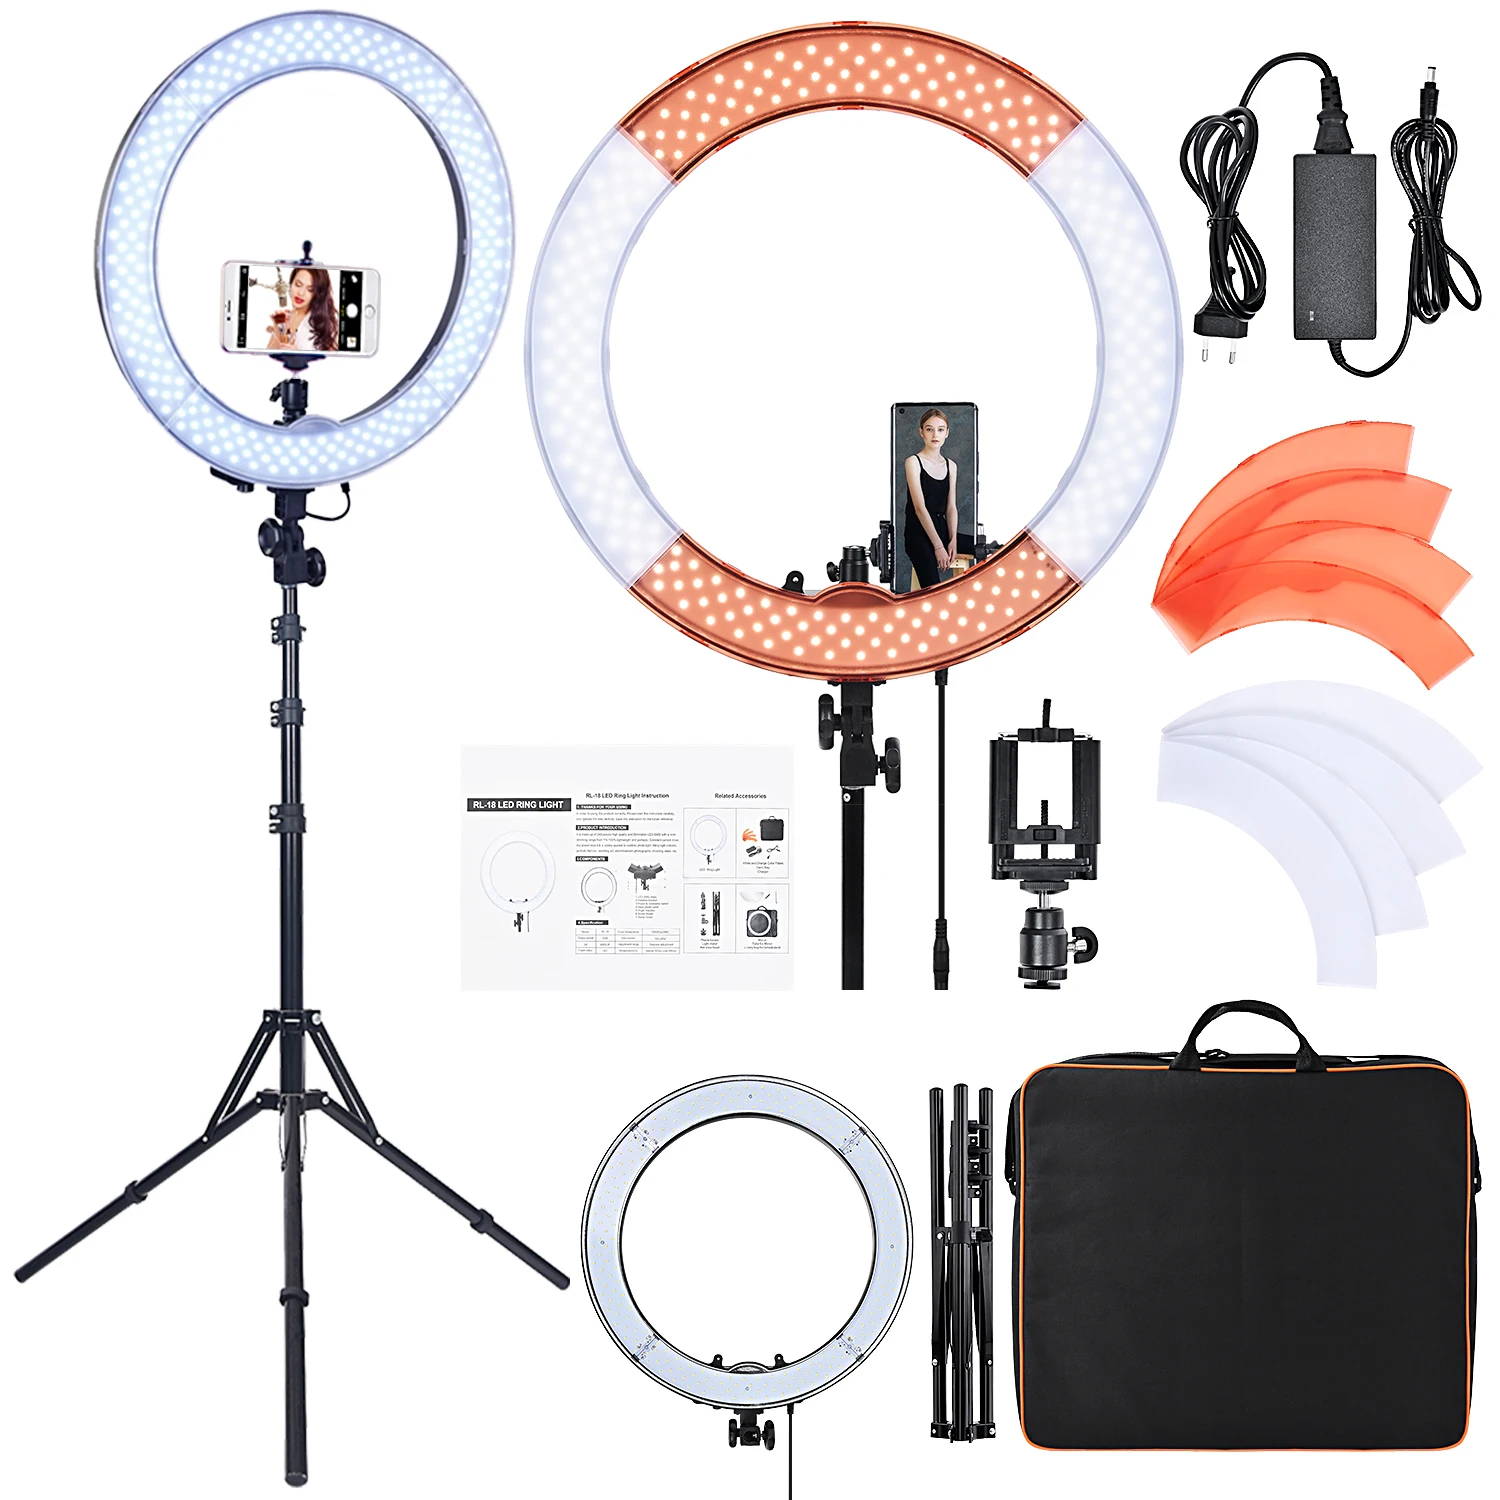 

FOSOTO RL18 Hot Sale Led Ring Light 18 Inch Photography Lighting Selfie Ring Lamp With Tripod Stand For Youtube Makeup Tik Tok